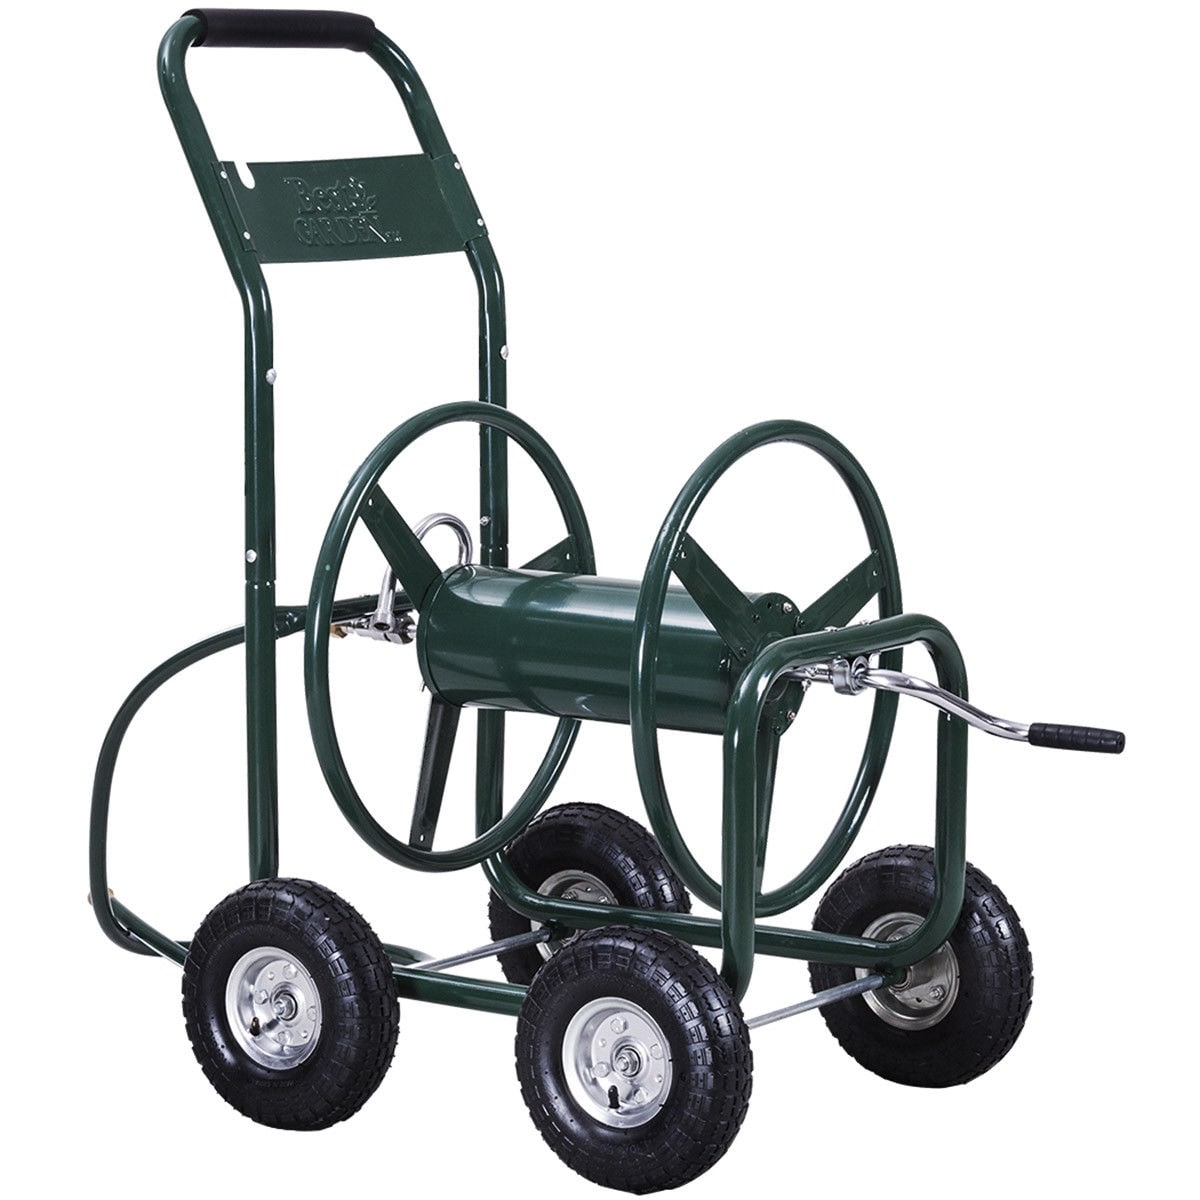 WELLFOR Portable Green Garden Hose Reel Cart with 300 ft